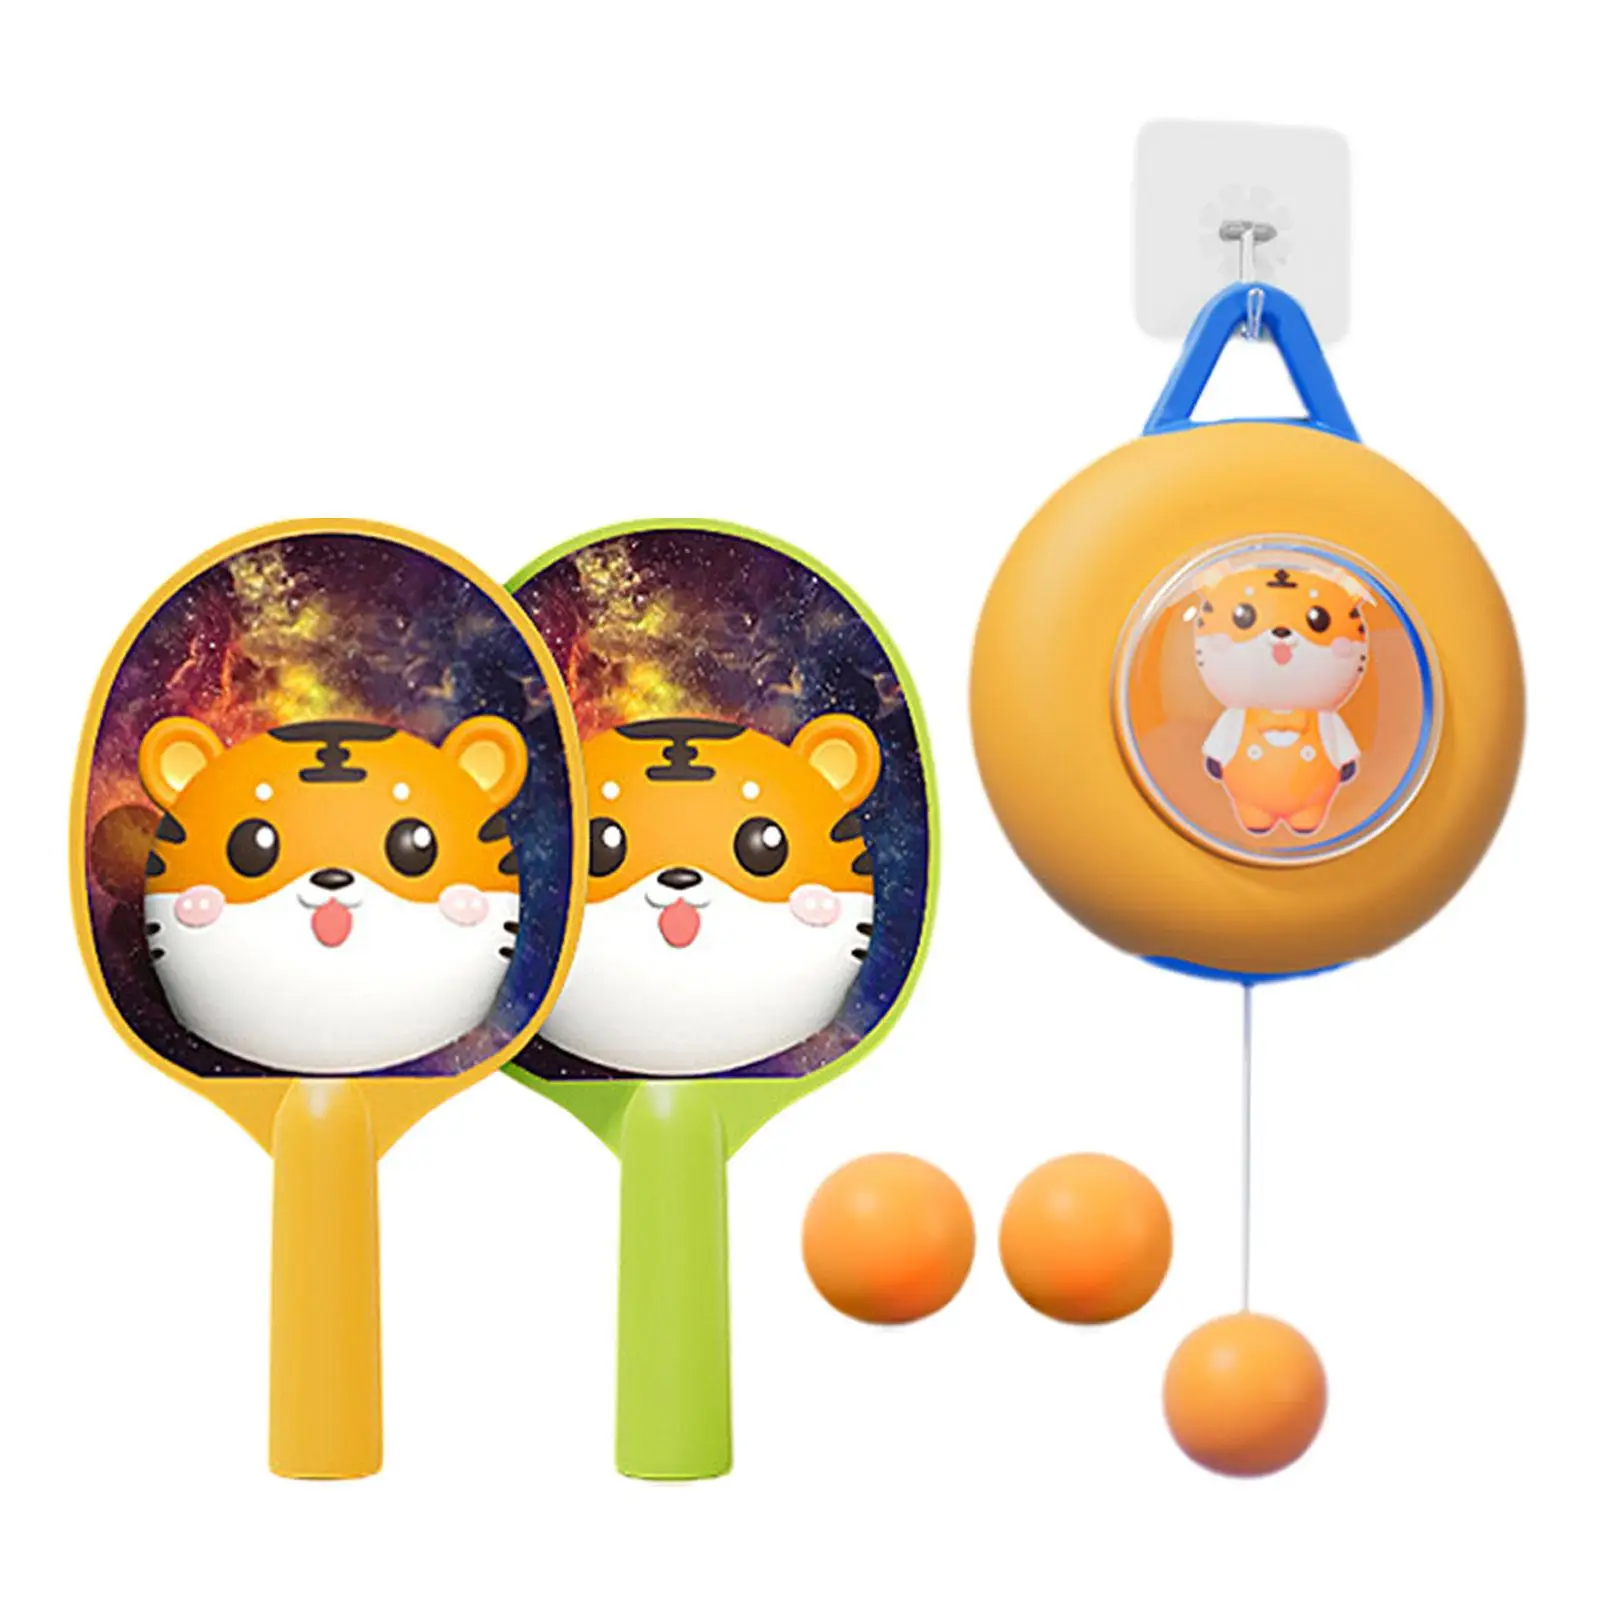 Tennis Trainer Self Training Set Sparring Device Pingpong Balls Paddles Set for Boys Girls Beginners Parent Kids Interaction